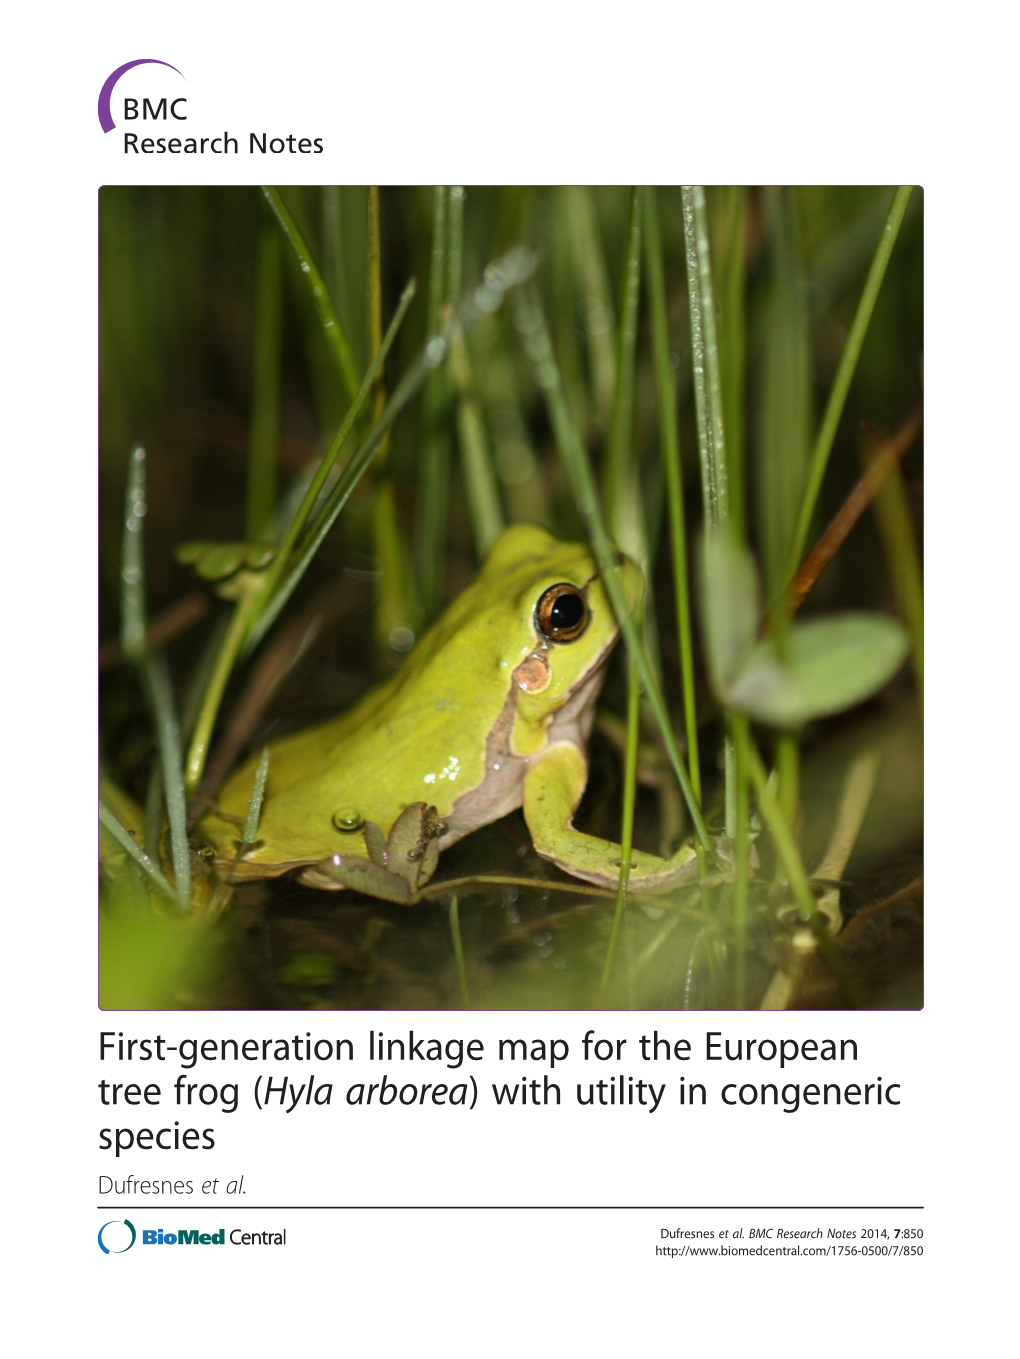 First-Generation Linkage Map for the European Tree Frog (Hyla Arborea) with Utility in Congeneric Species Dufresnes Et Al